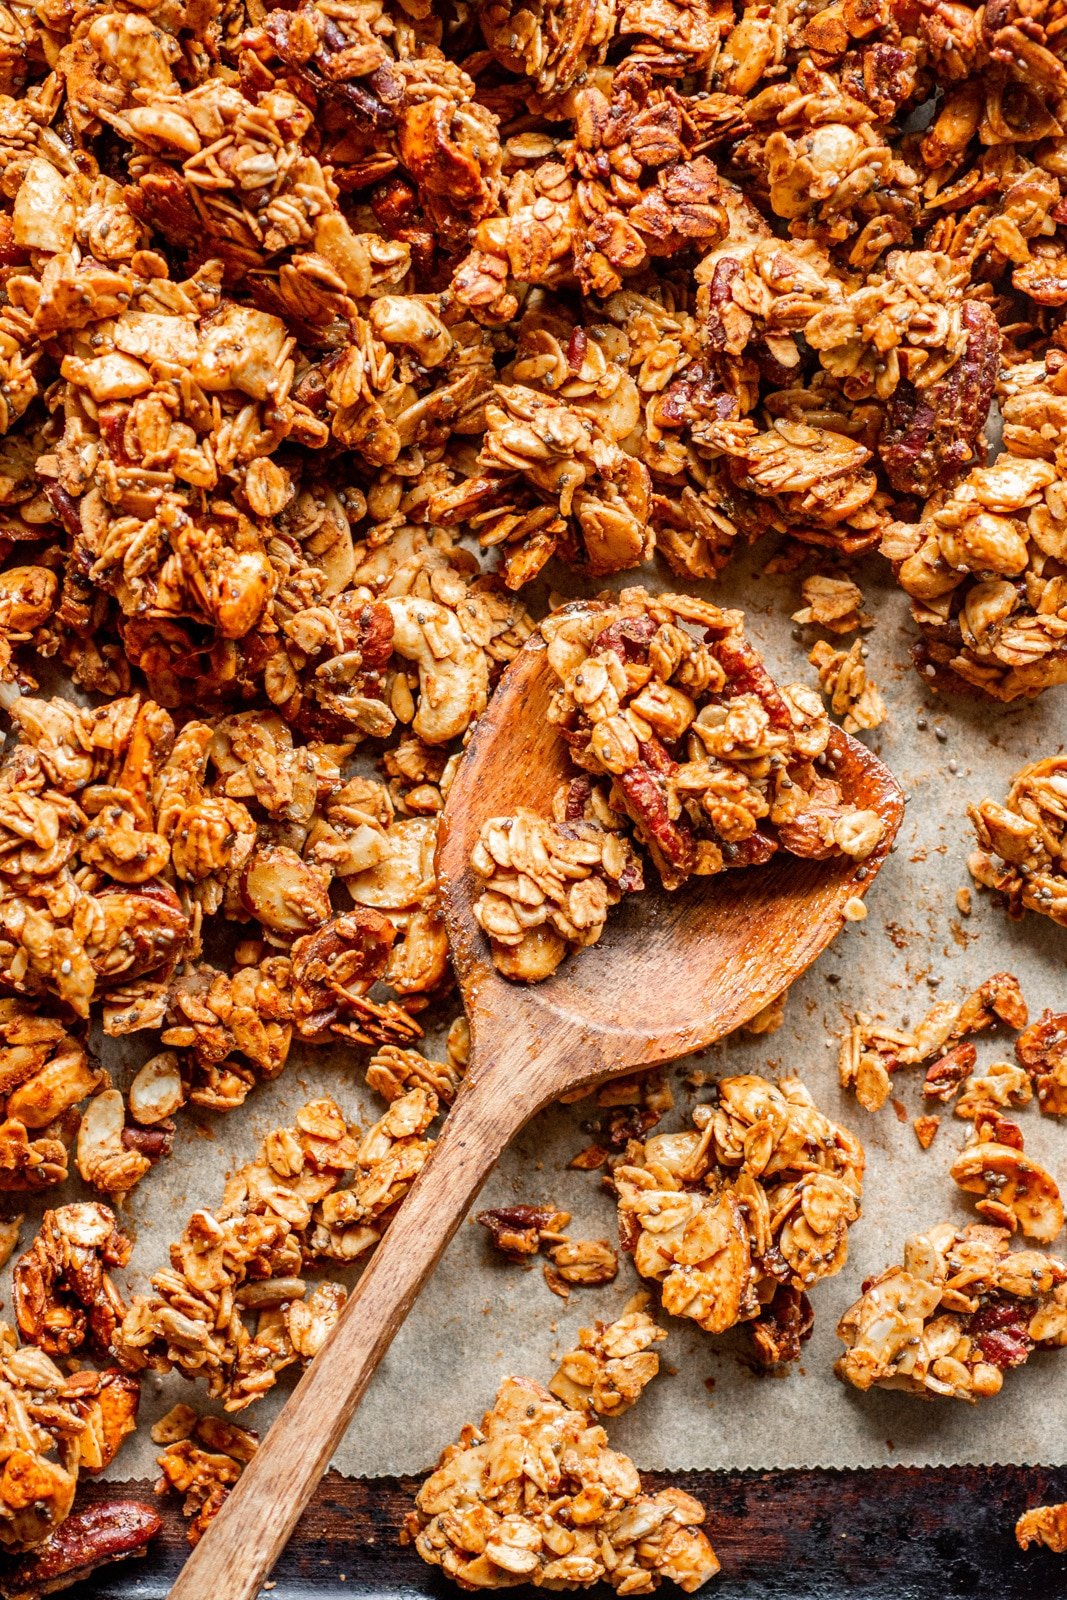 Overhead shot of a wooden spoon holding a few crunchy granola clusters, on a parchment lined baking sheet.